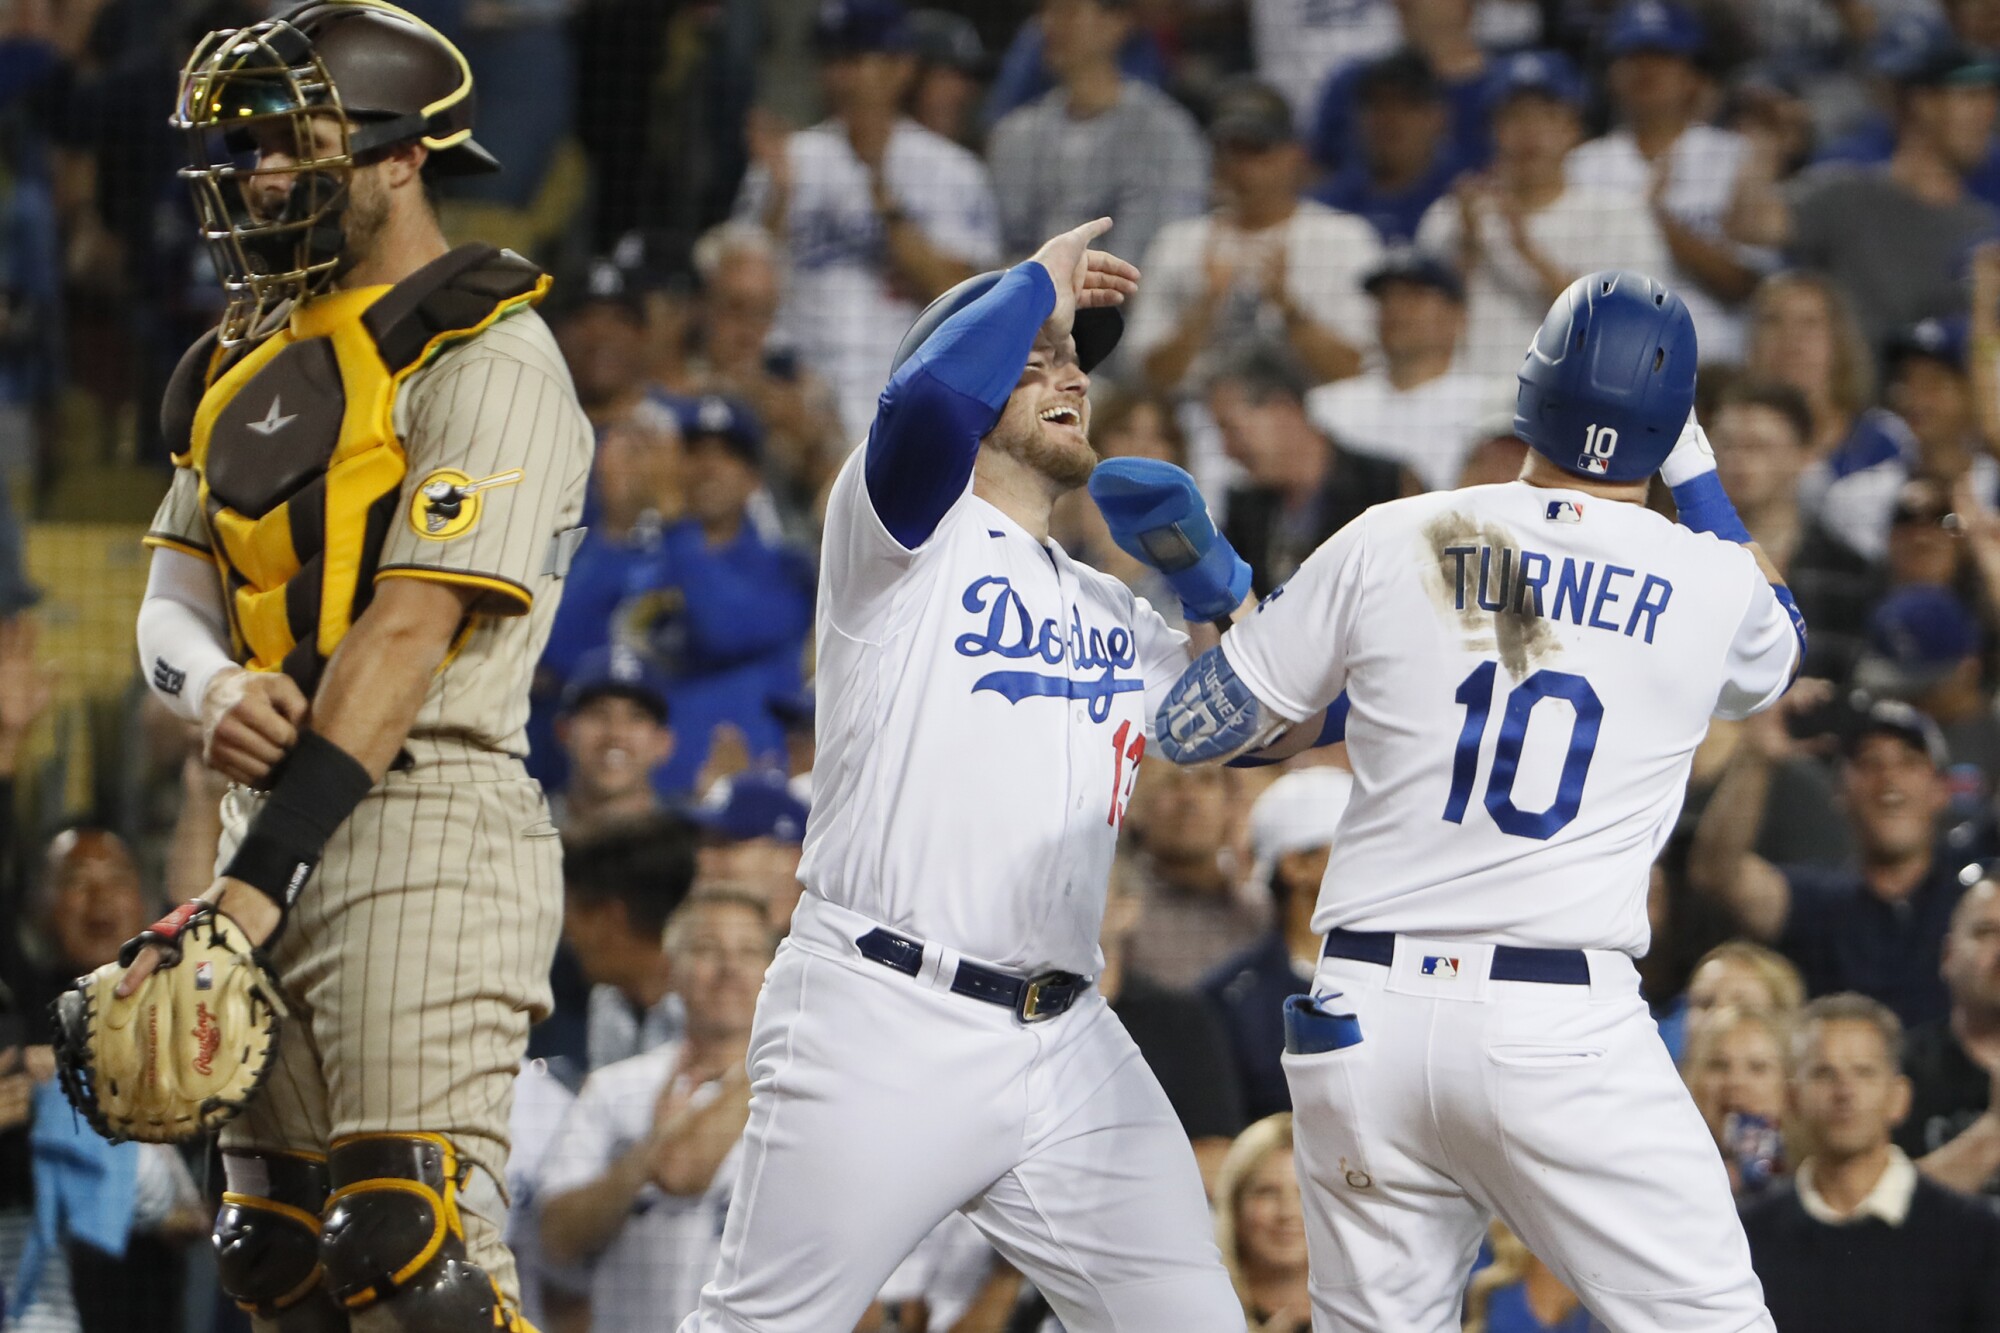 Justin Turner, right, celebrates with Dodgers teammate Max Muncy after hitting a two-run home run.